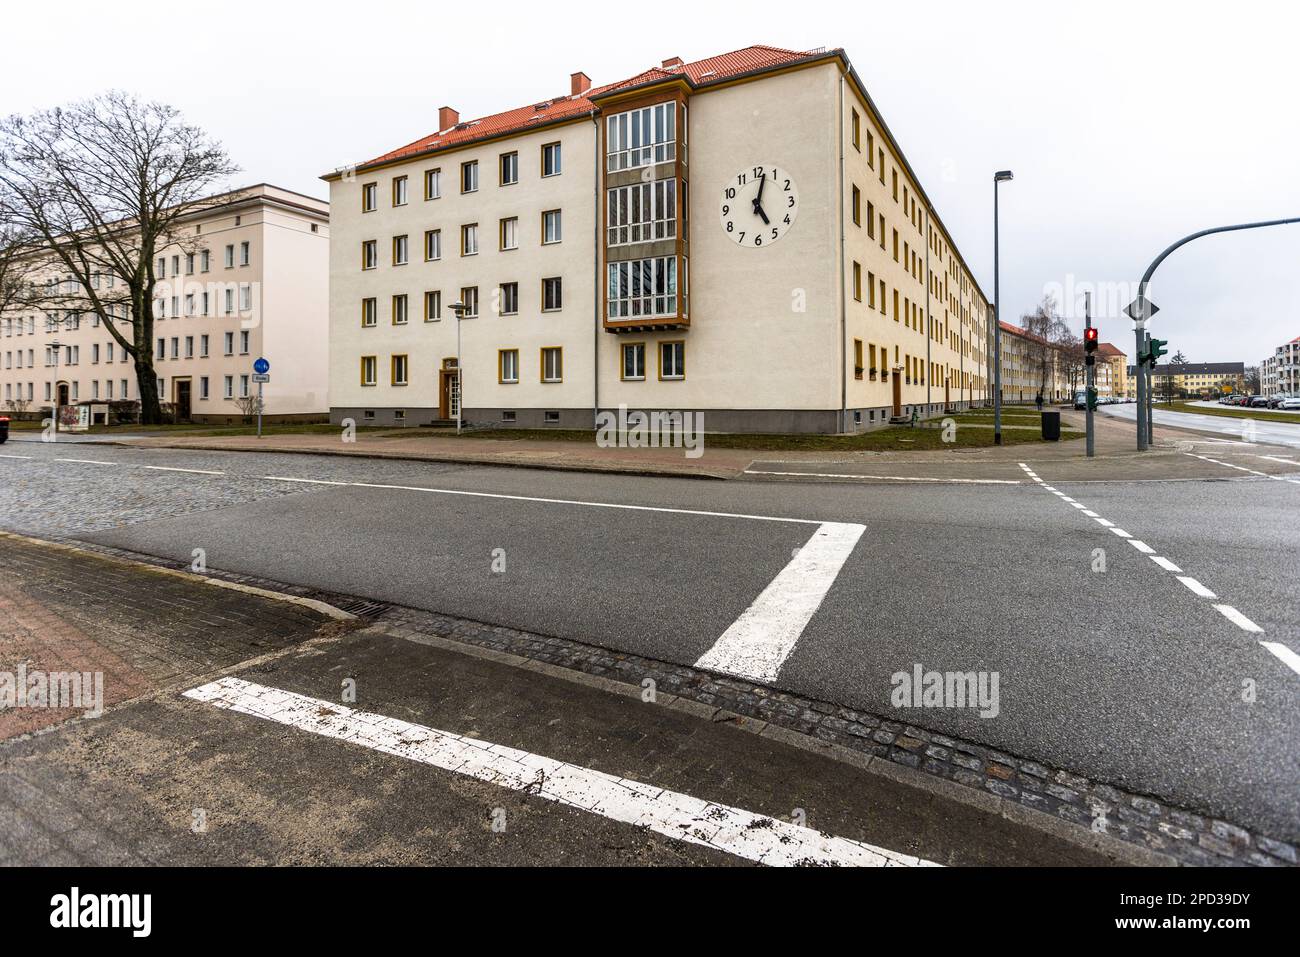 Residential building with bay window and clock on the Republic Road, Eisenhüttenstadt. This was the first new town foundation in Germany after the end of the Second World War, Eisenhüttenstadt, Germany Stock Photo